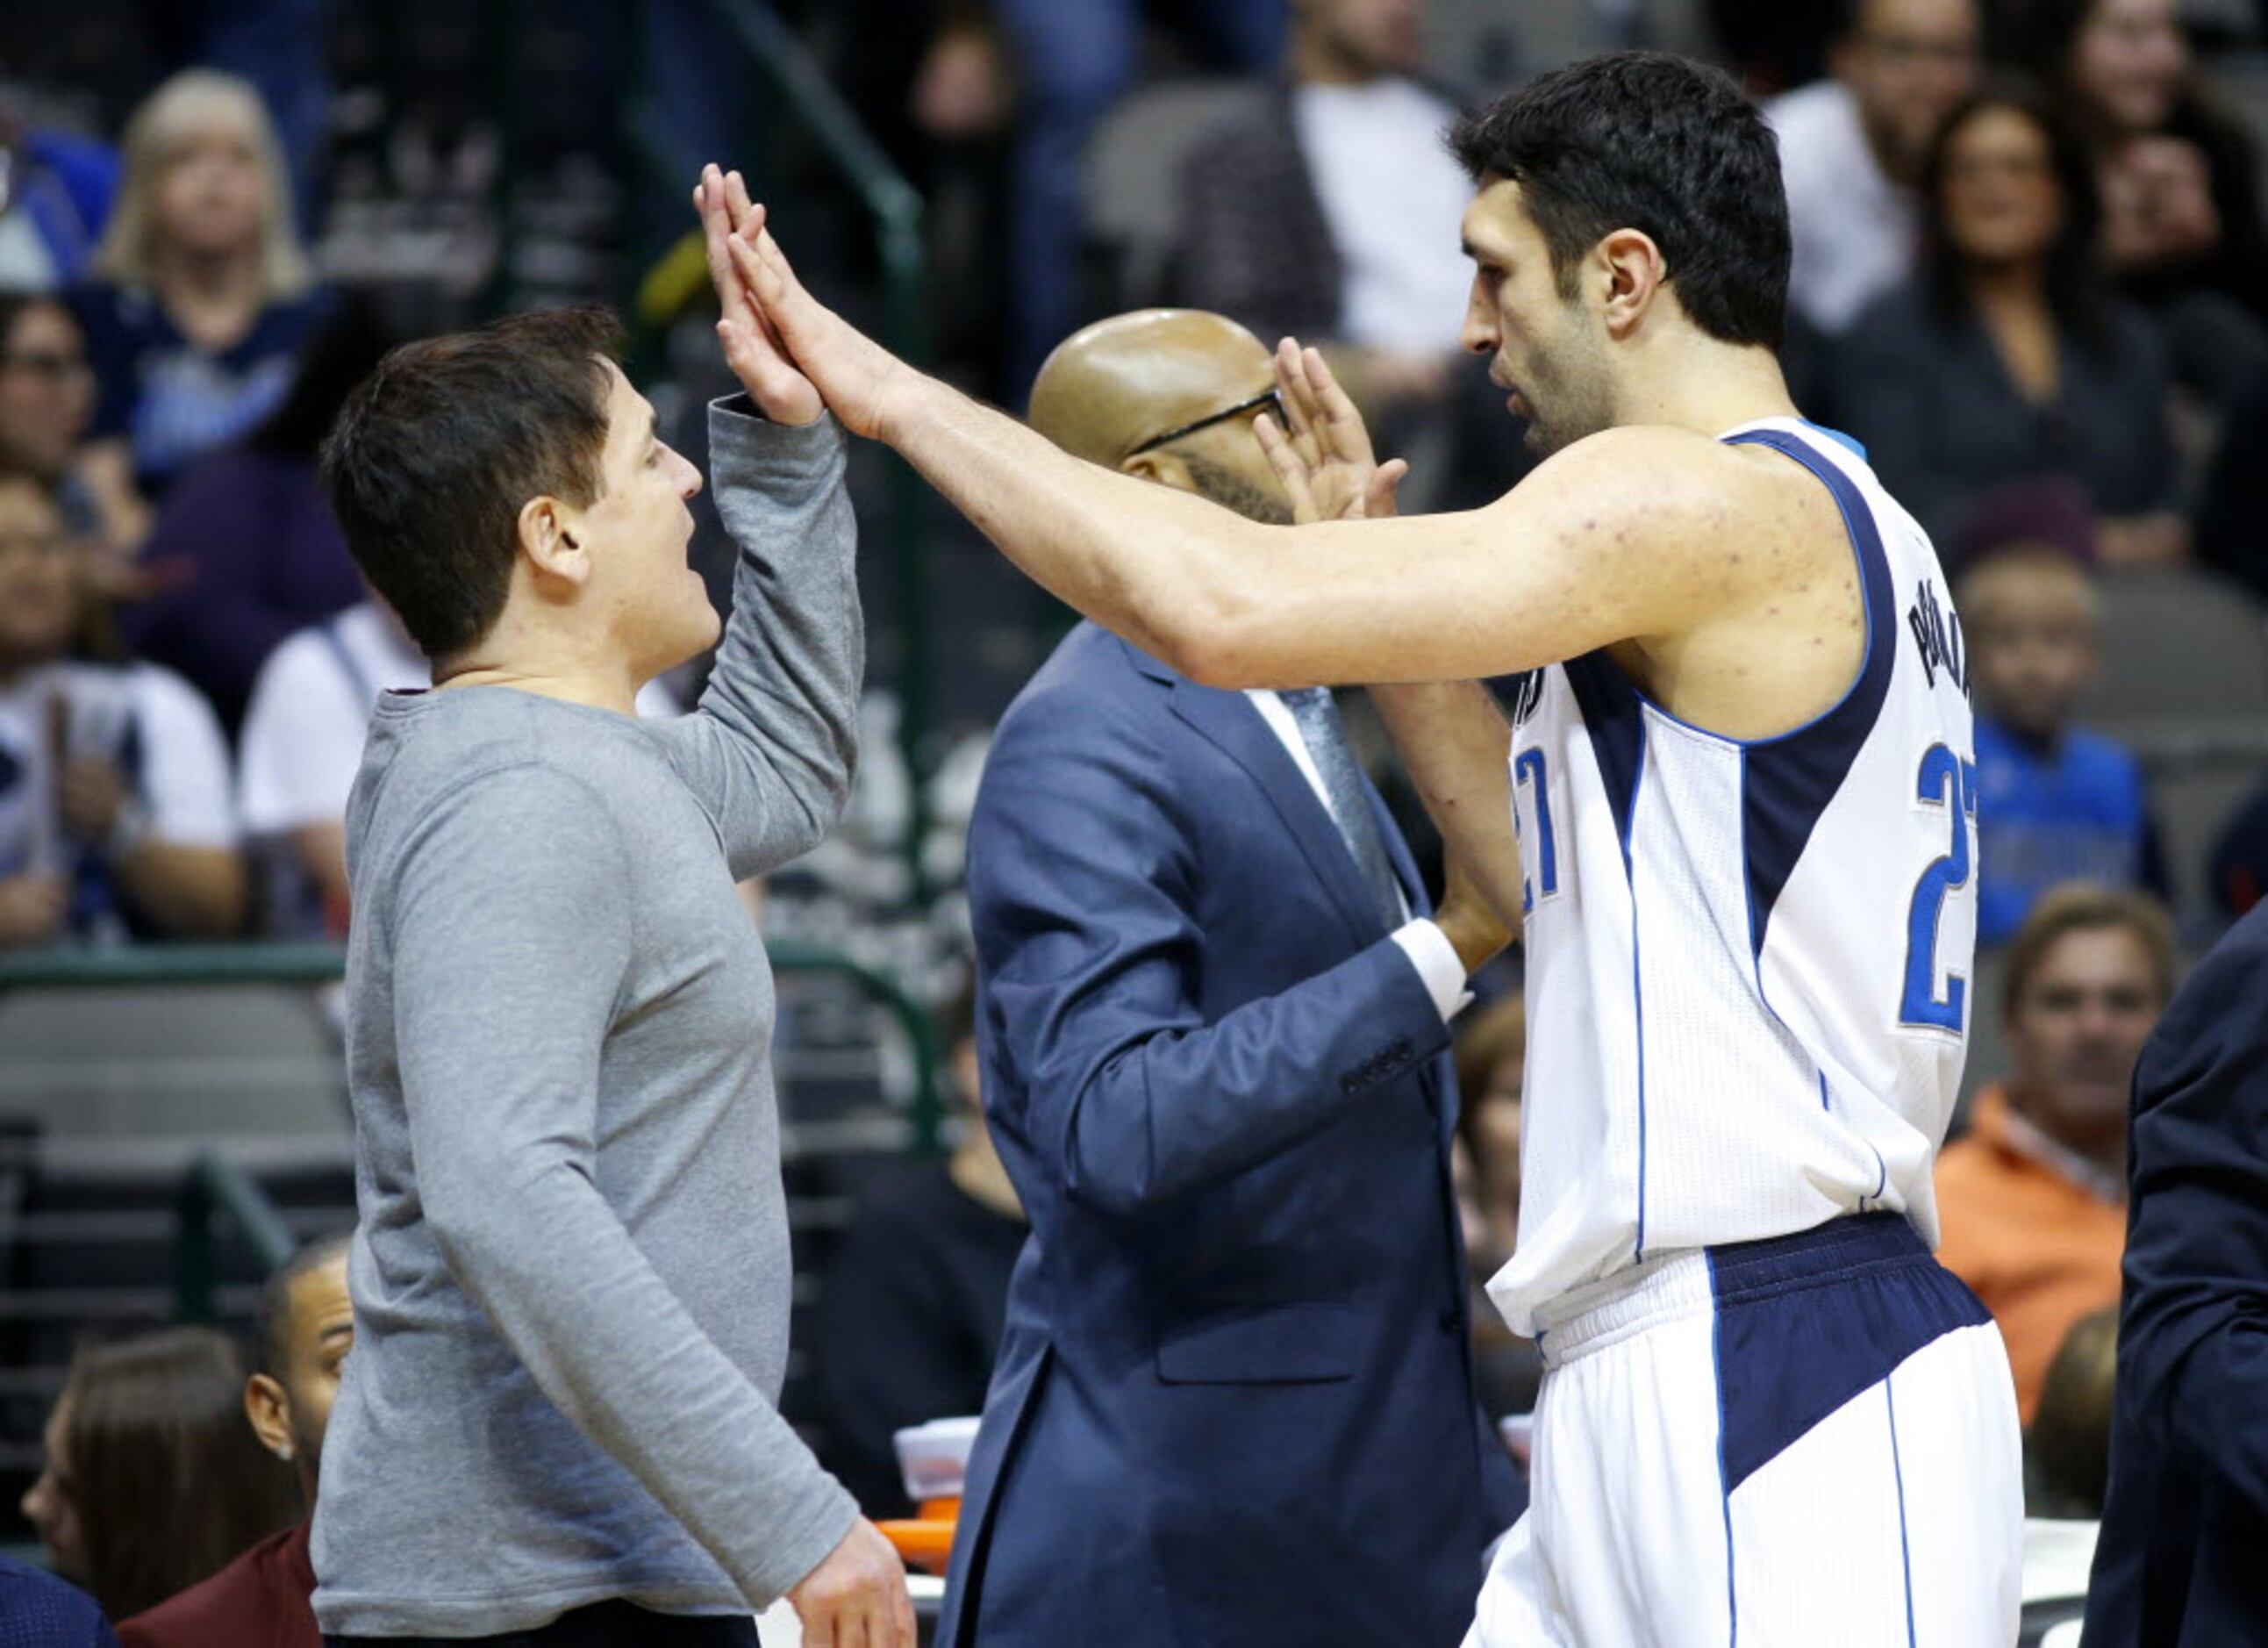 Why Zaza Pachulia started 'liking Dallas' as an NBA rookie in 2003